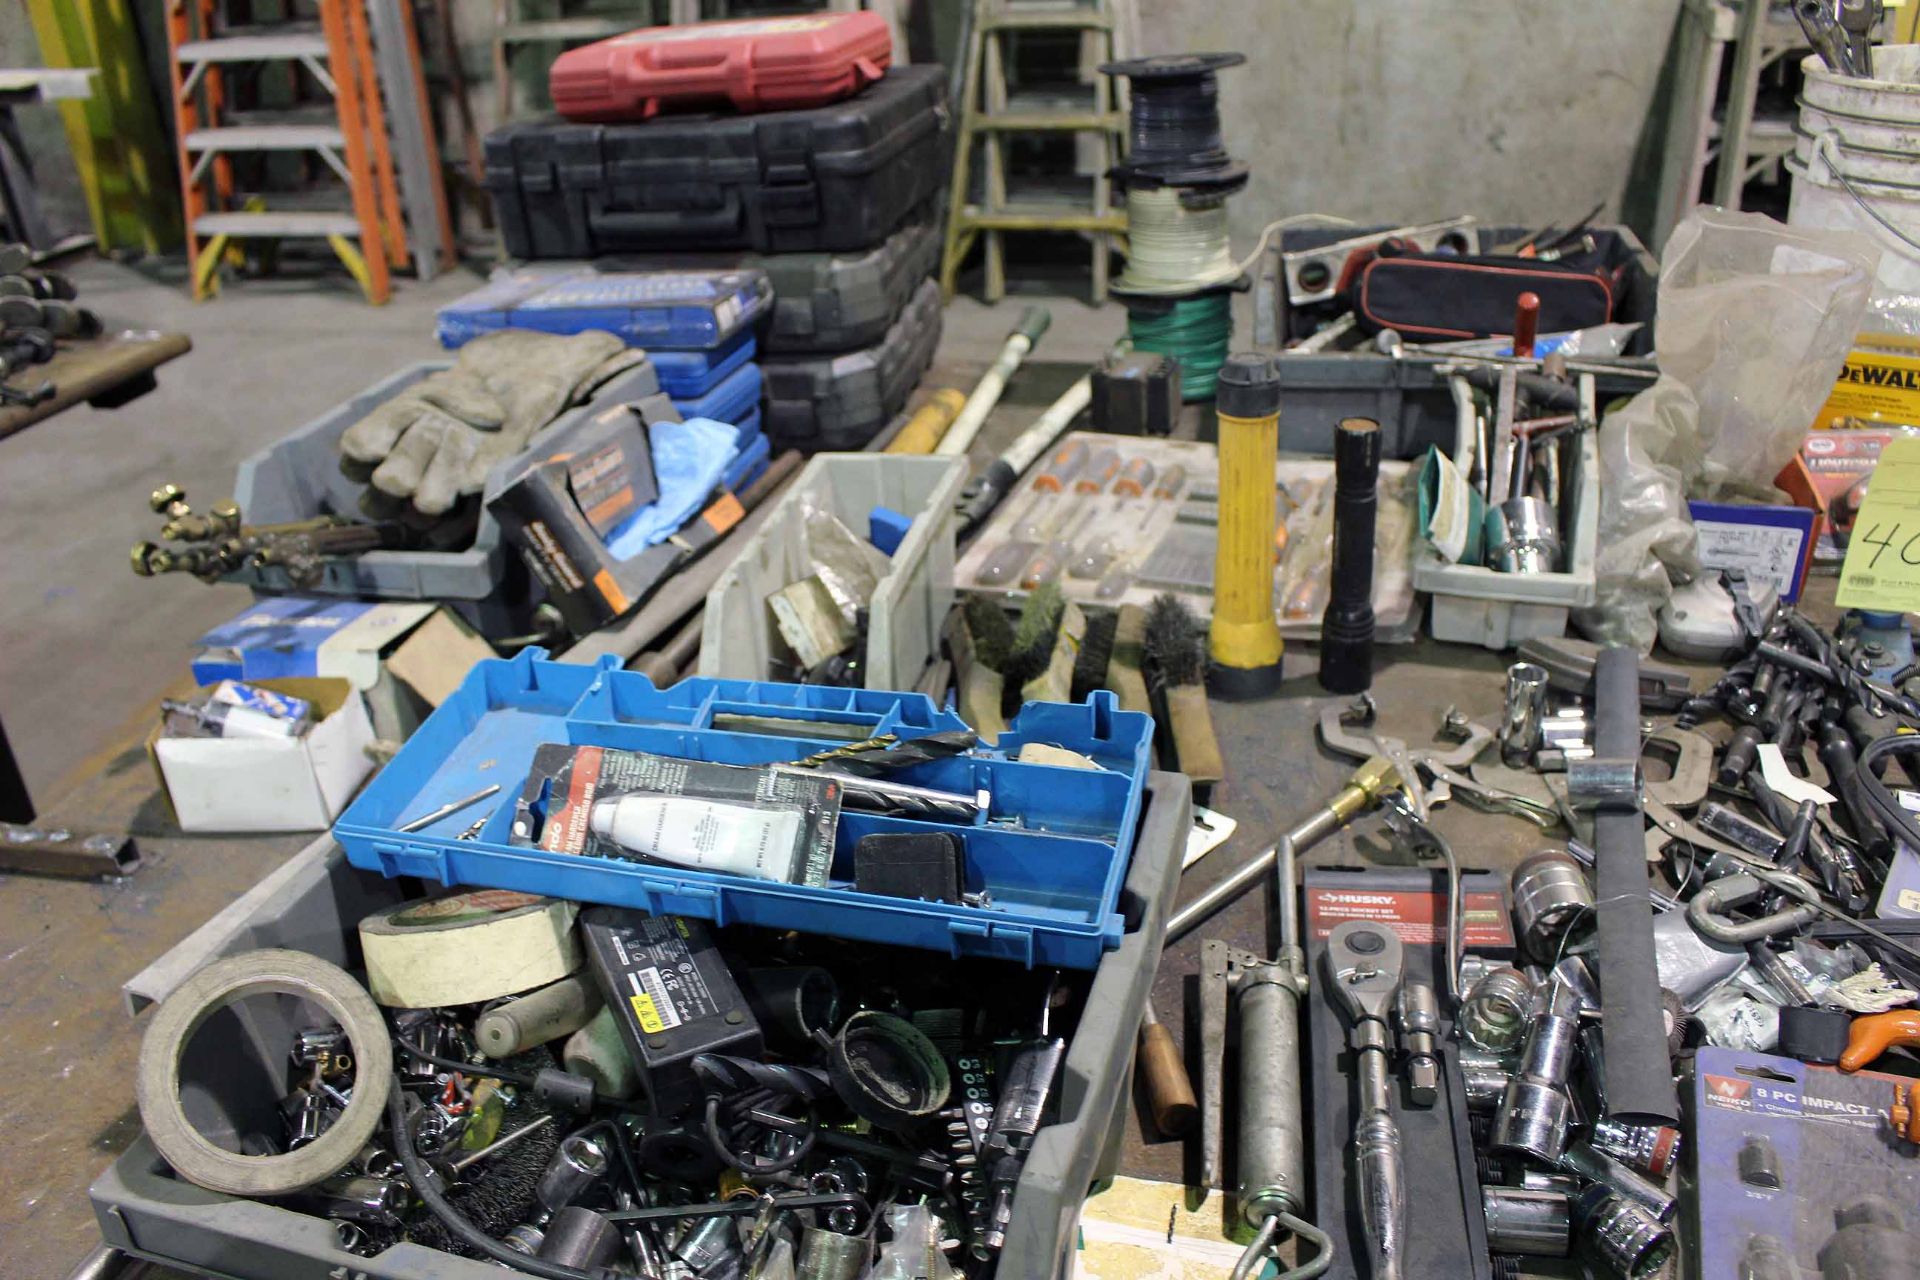 LOT CONSISTING OF: misc. hand tools, wrenches, pliers, sockets, electric drills, etc.